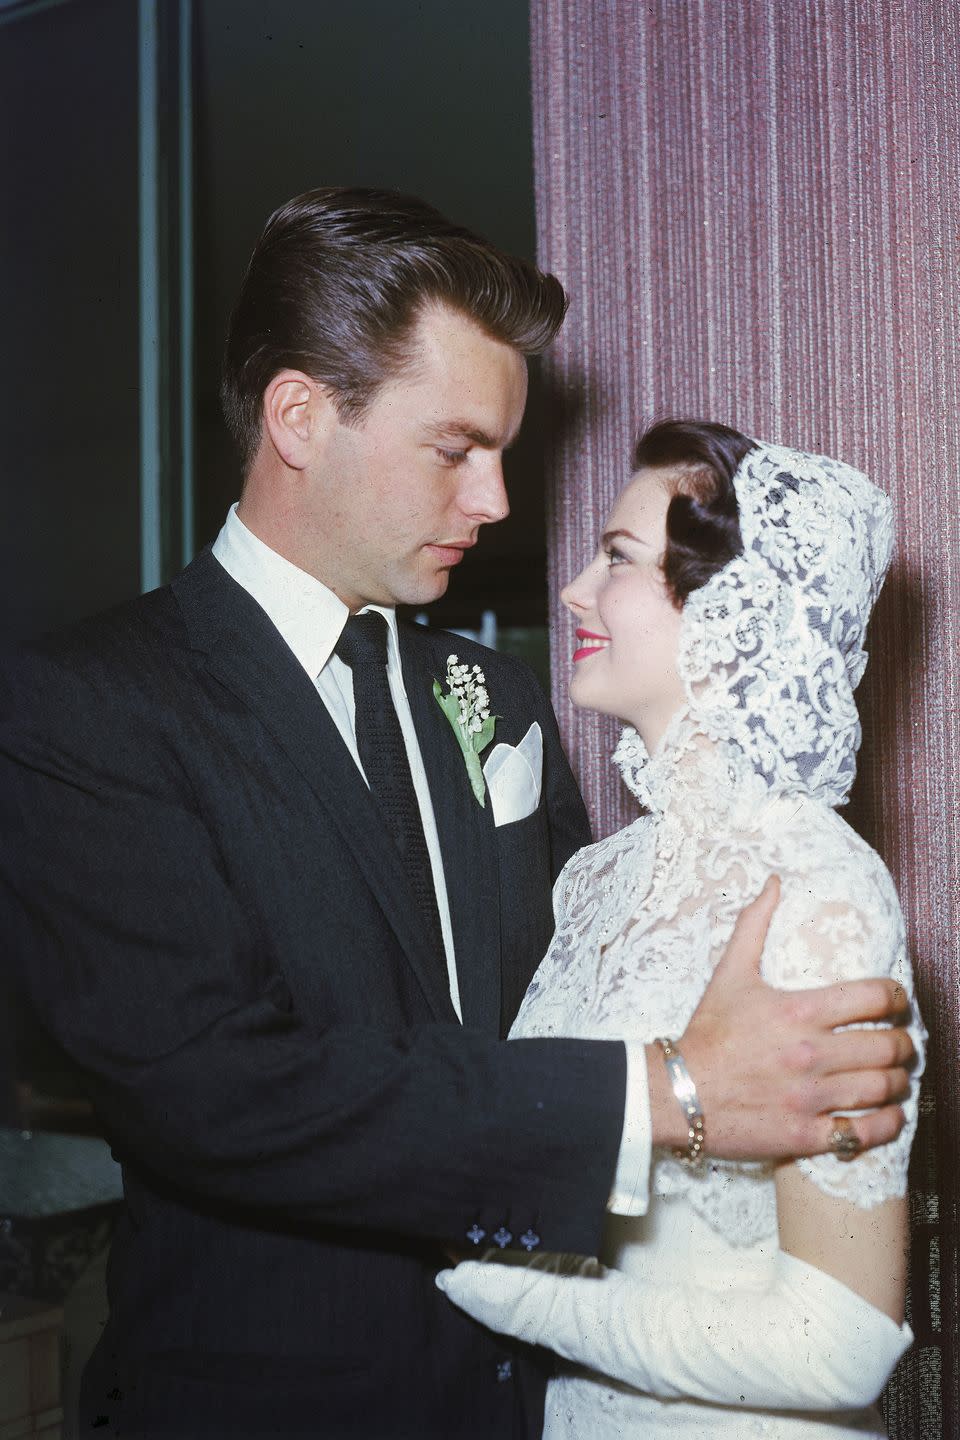 1957: Robert Wagner and Natalie Wood